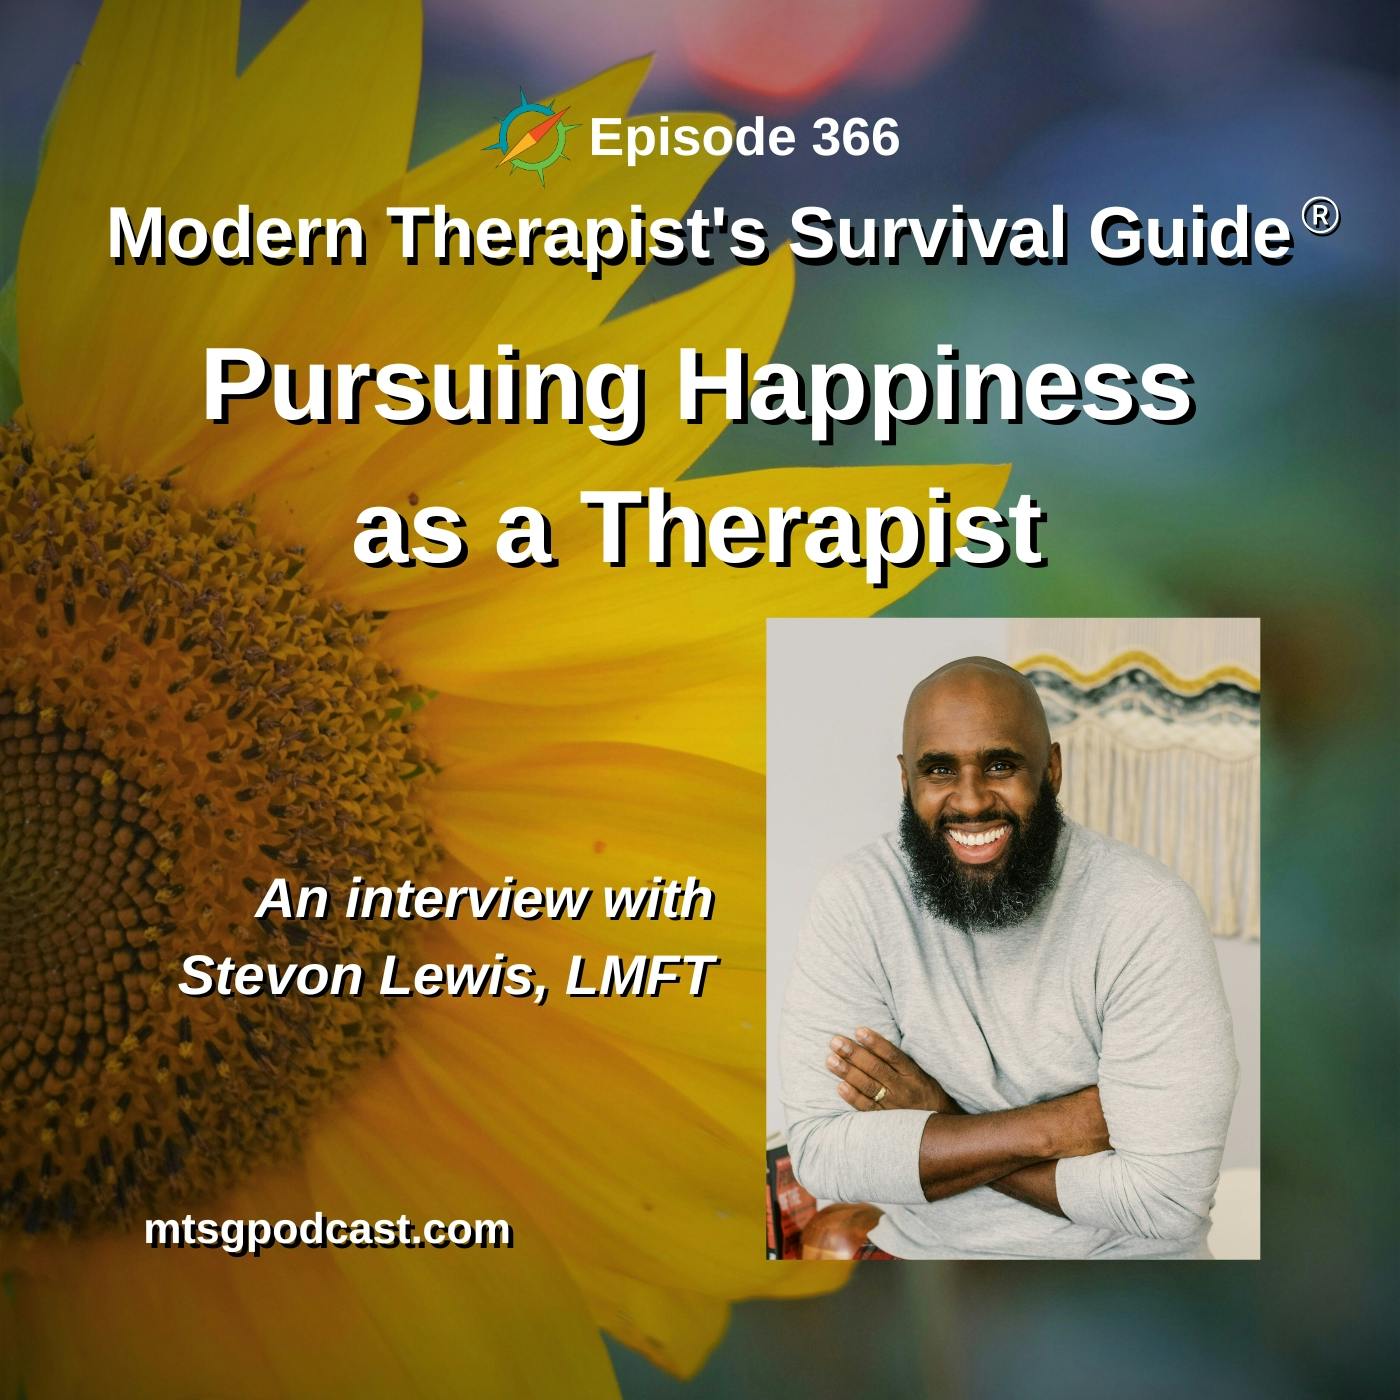 Pursuing Happiness as a Therapist: An interview with Stevon Lewis, LMFT